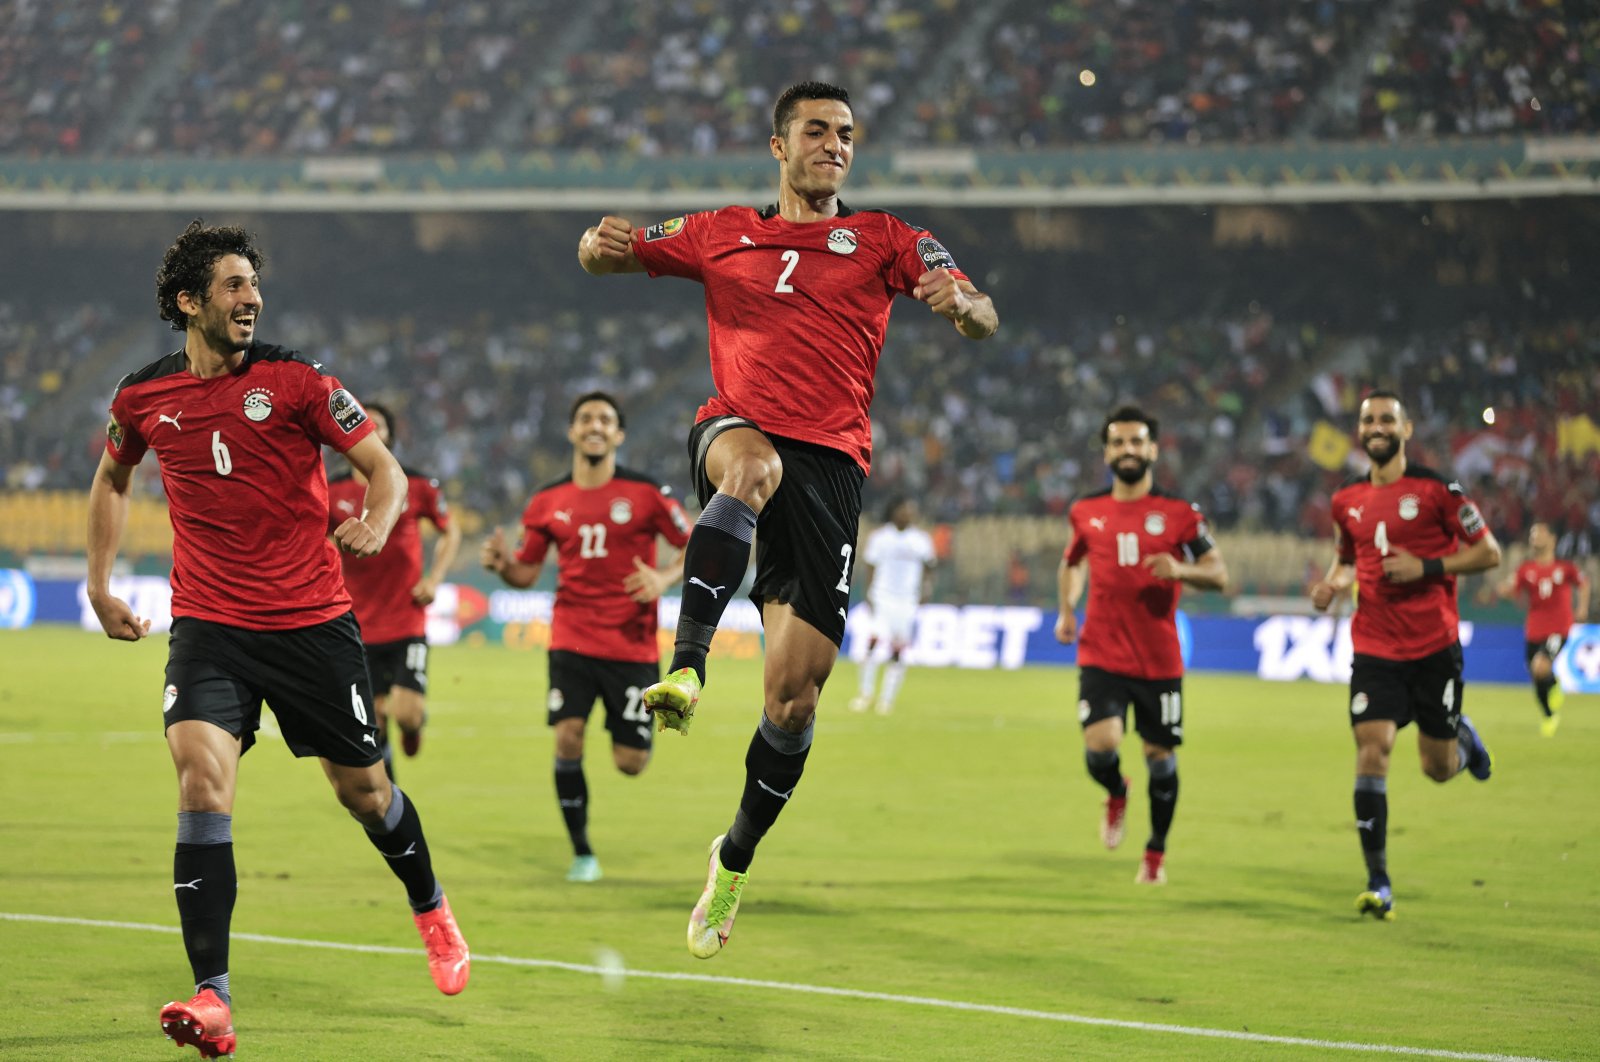 Egypt&#039;s Mohamed Abdelmonem (C) celebrates scoring a goal in a Cup of Nations match against Sudan, Yaounde, Cameroon, Jan. 19, 2022.